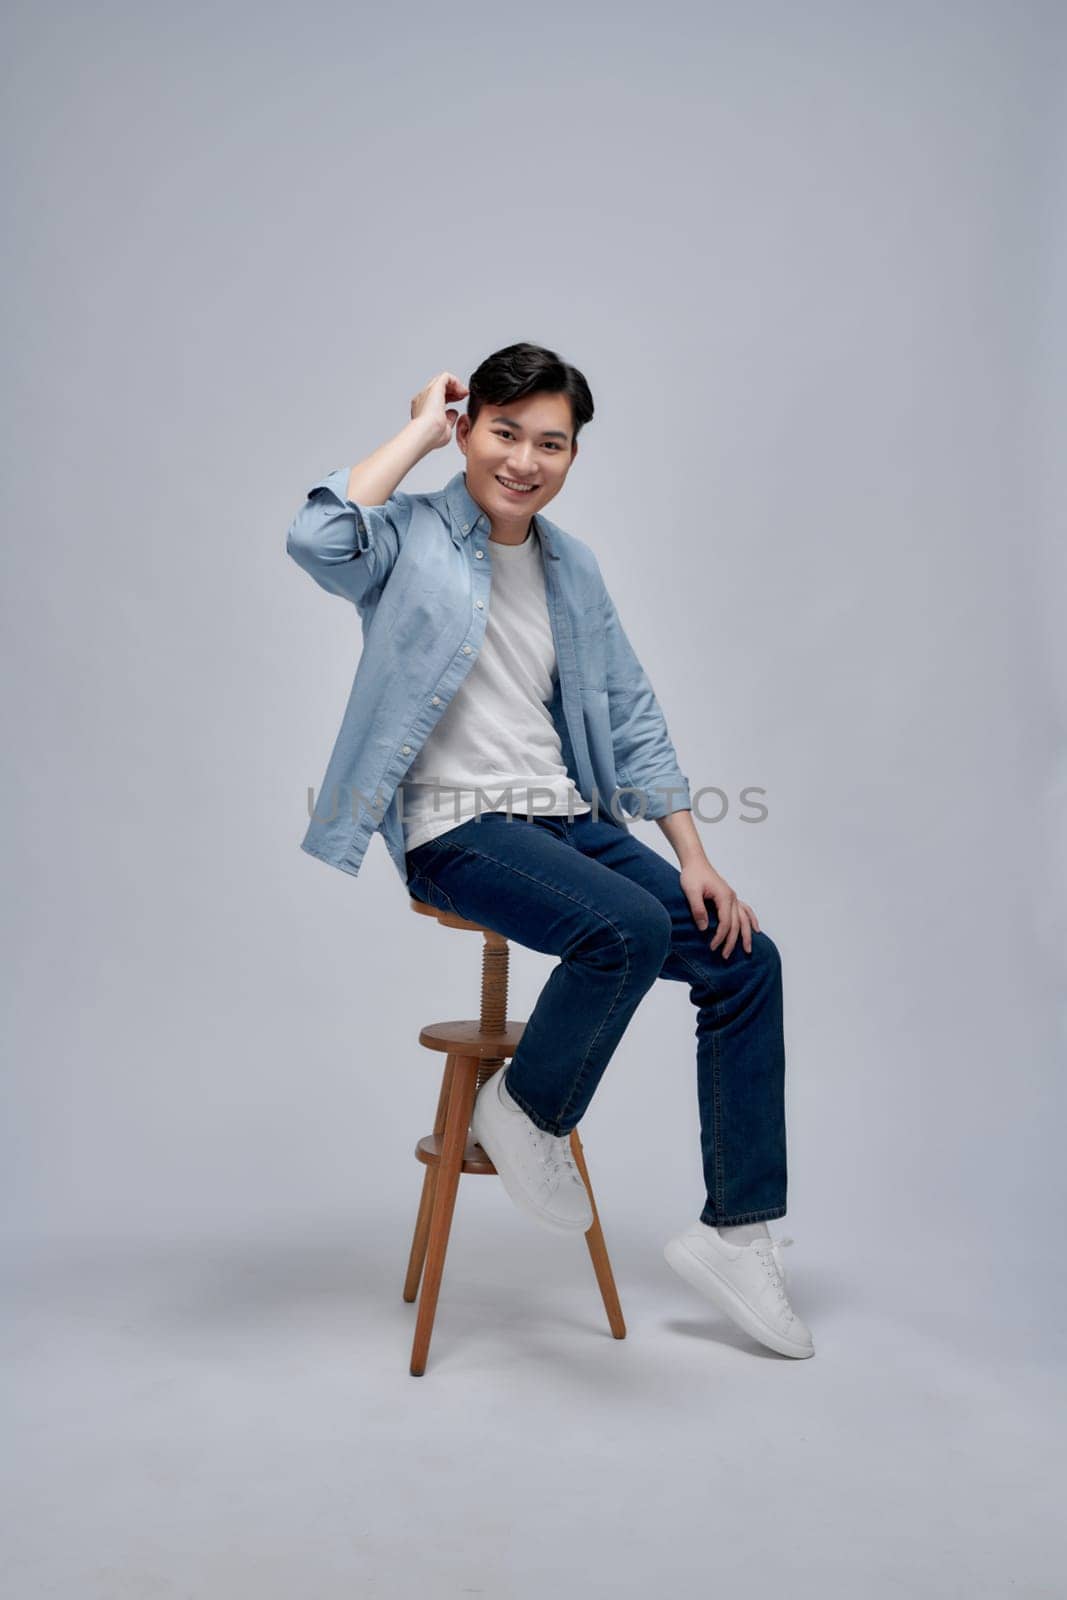 Feeling comfortable. Joyful positive young man sitting on a stool and smiling